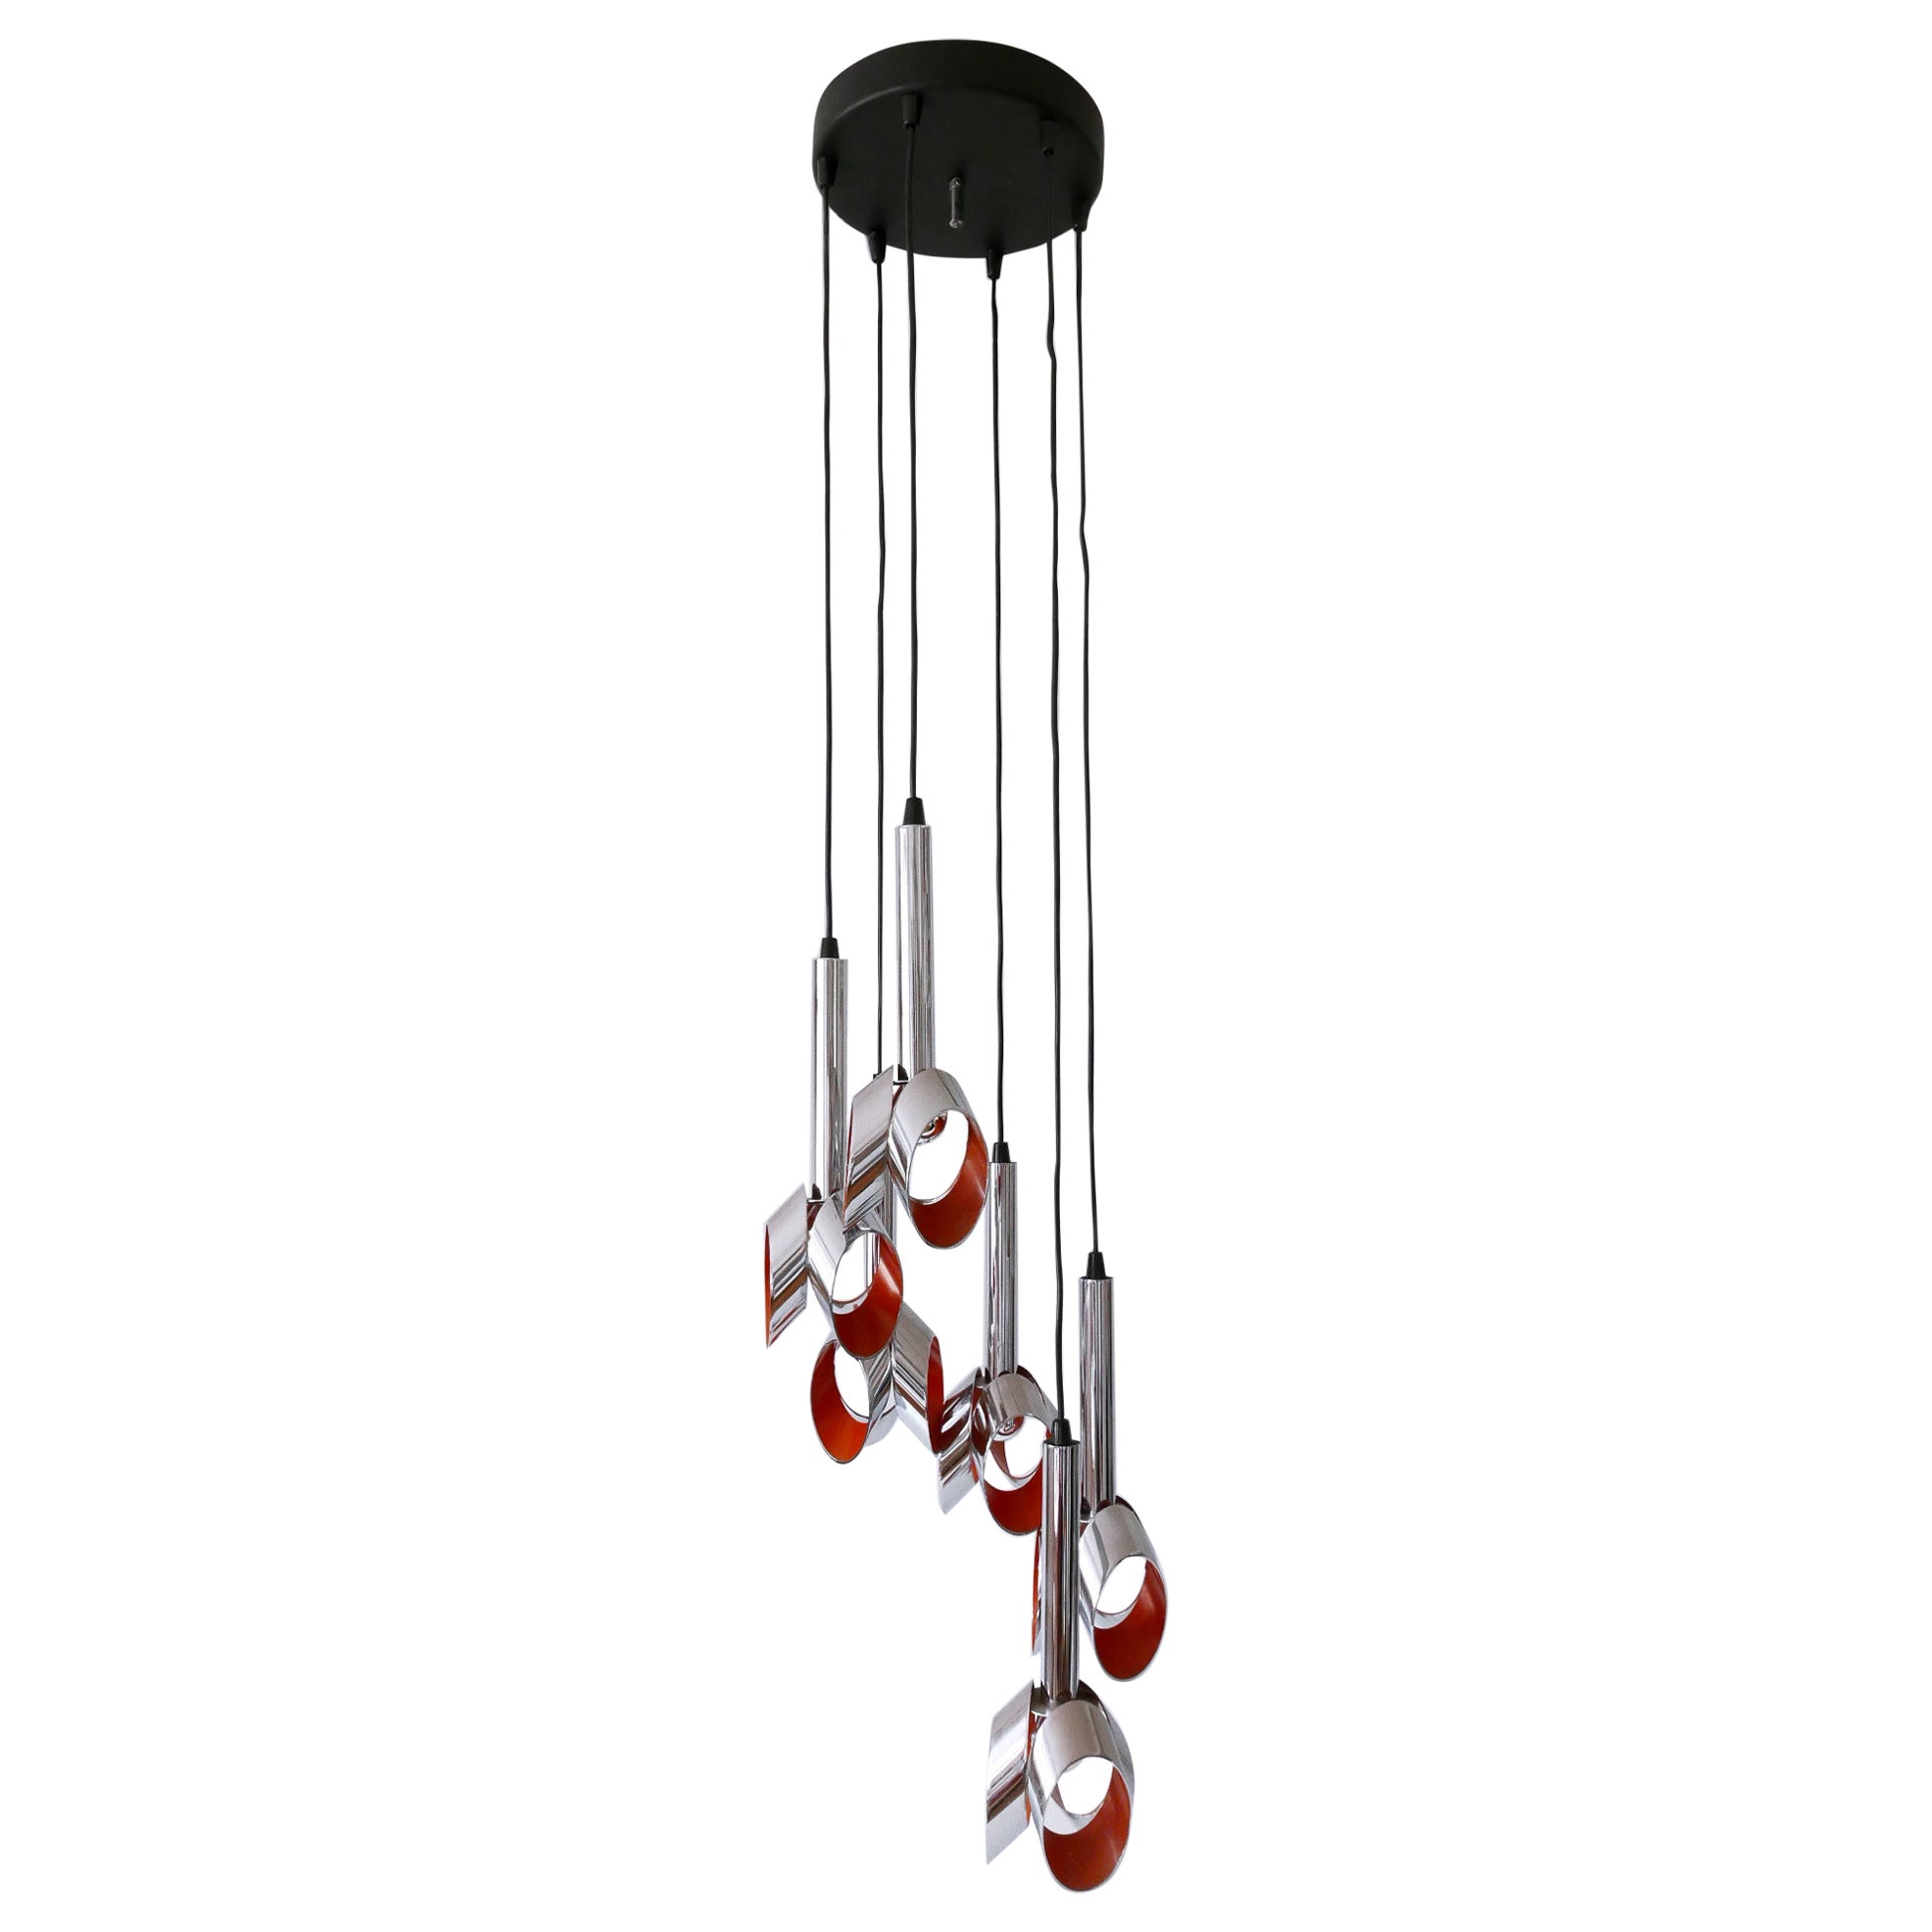 Exceptional Mid-Century Modern Six-Armed Tulip Chandelier or Pendant Lamp, 1970s For Sale